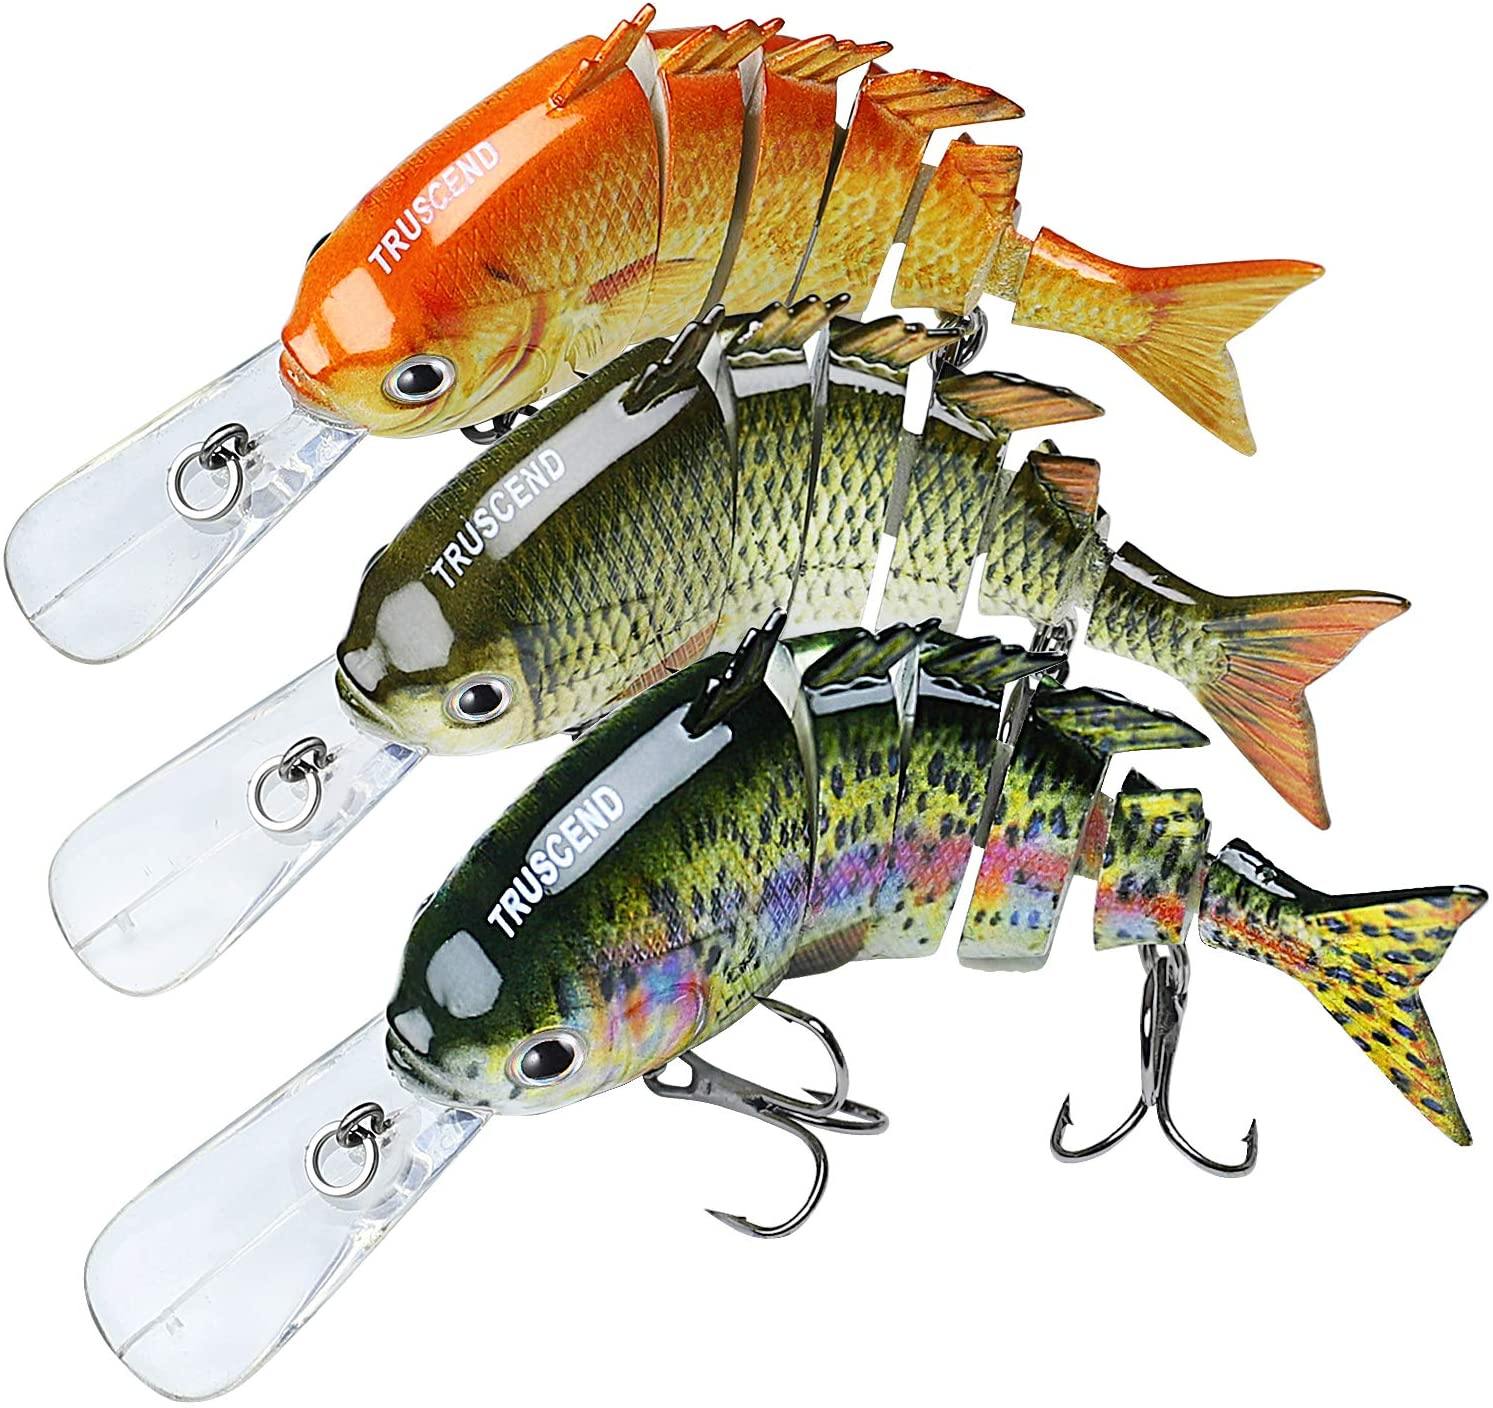 TRUSCEND Bionic Tilapia Jointed Swimbait with Tongue - Truscend Fishing